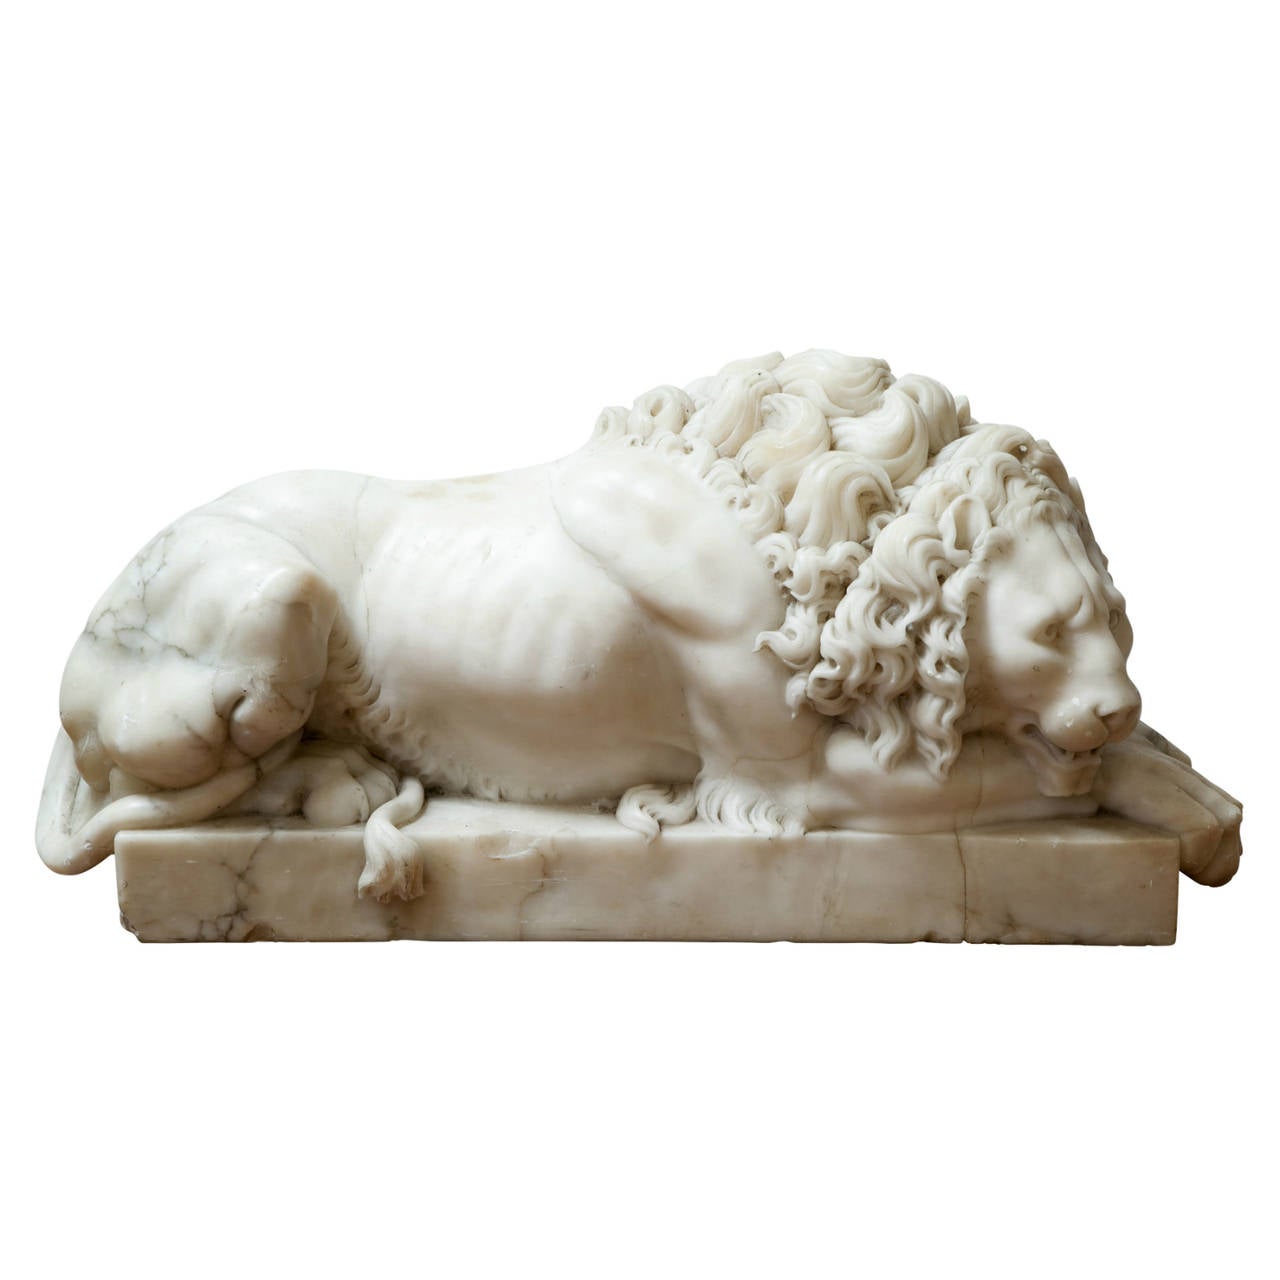 A pair of 19th Century hand-carved Carrara marble lions. These detailed pieces are based on a pair of sculptures that sit at the entry of Pope Clement XIII's monument in Vatican City, as sculpted by Antonio Canova in 1792. One lion is depicted